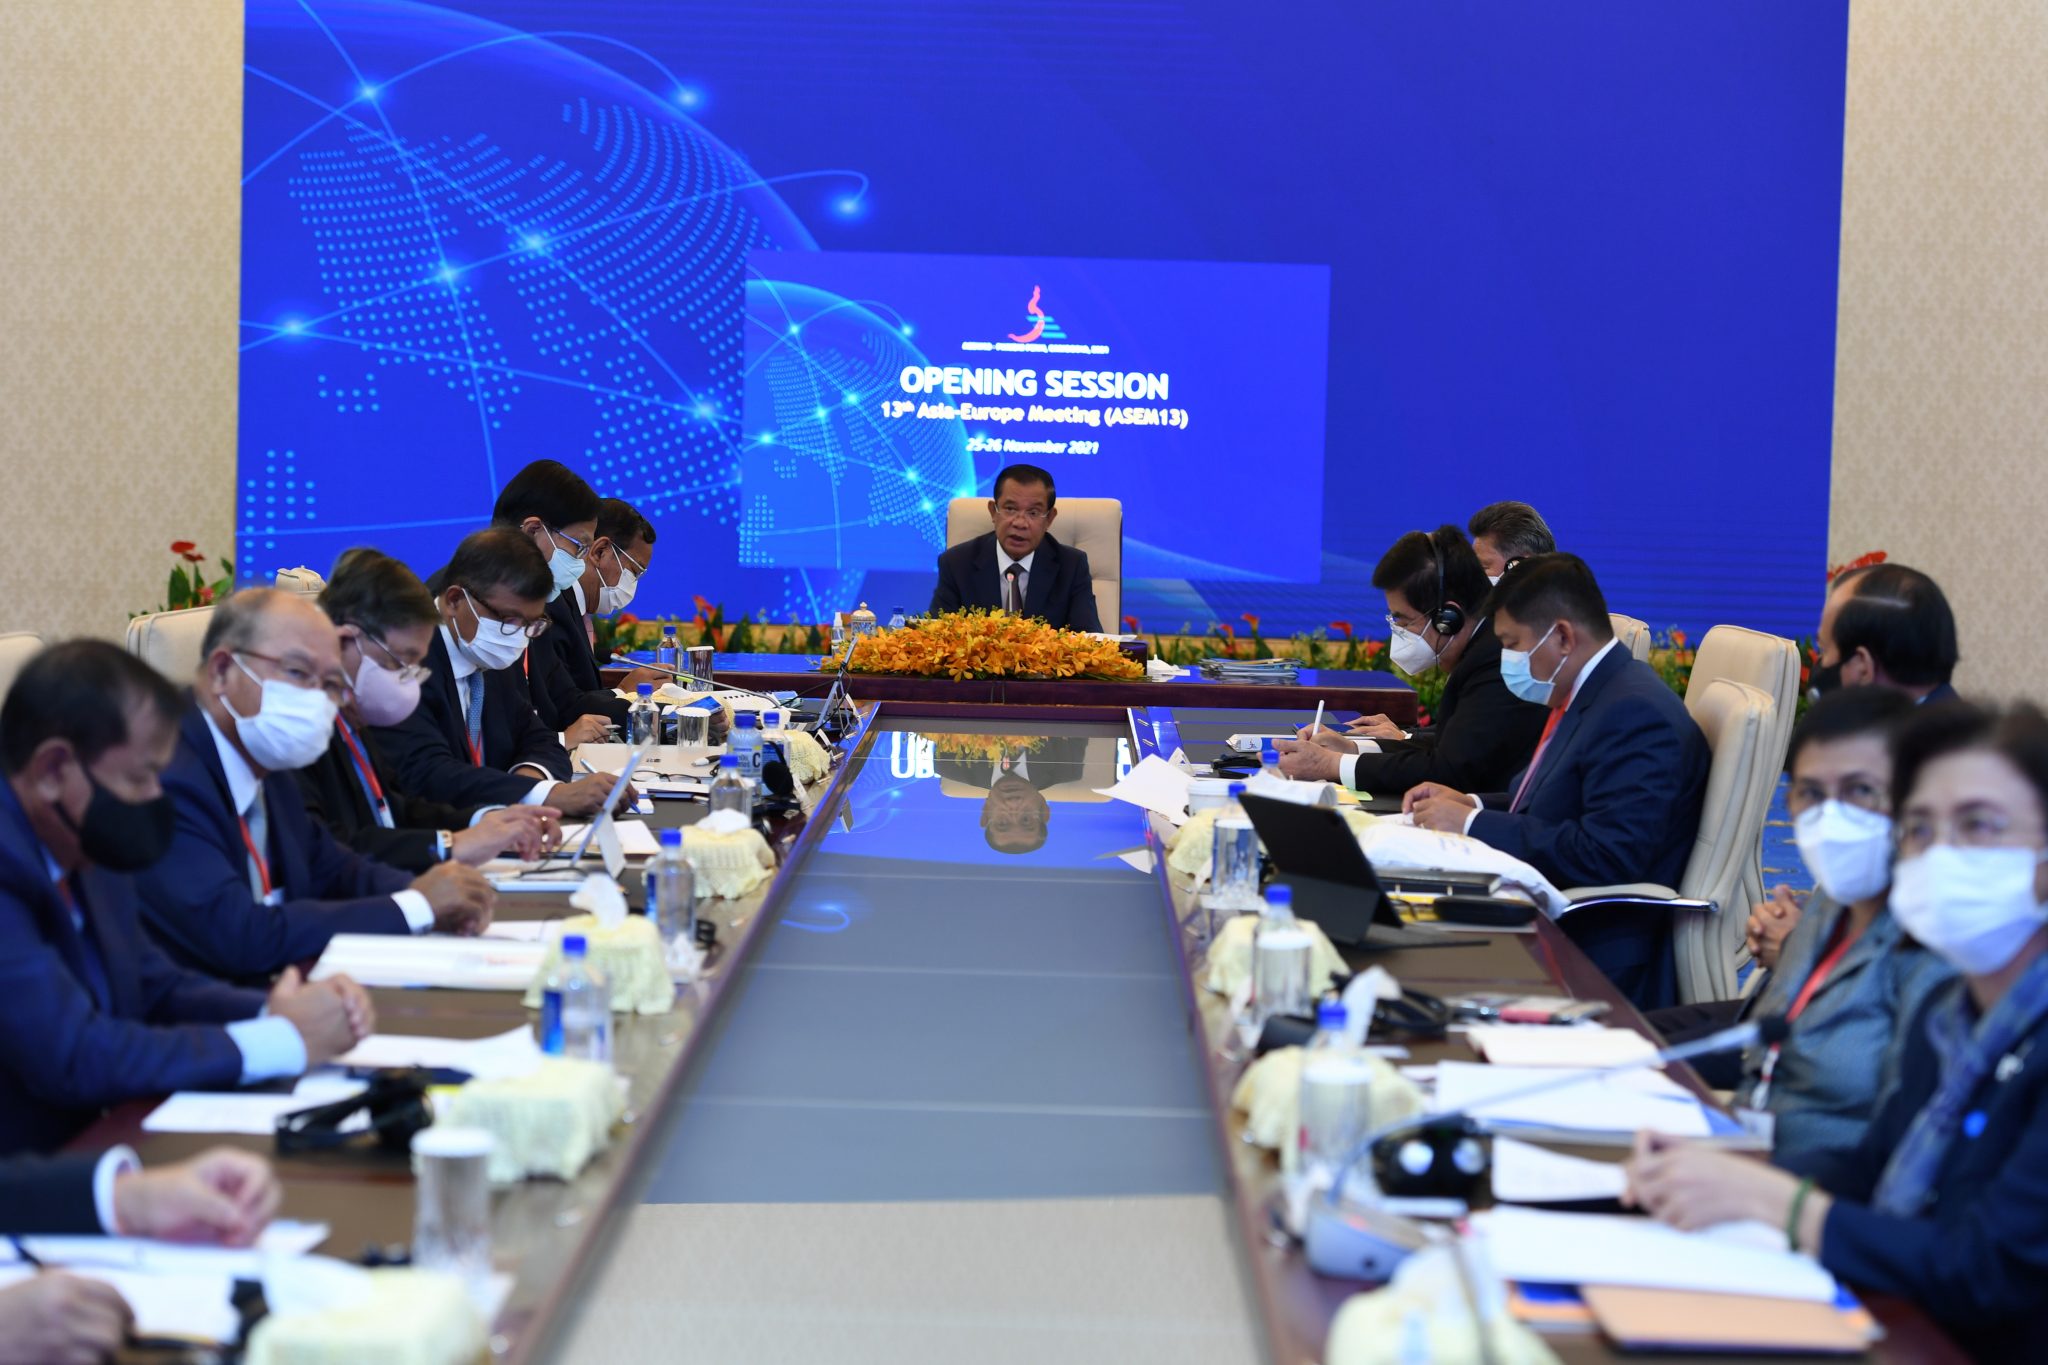 The Asia-Europe Meeting needs to agree on a connectivity code of conduct